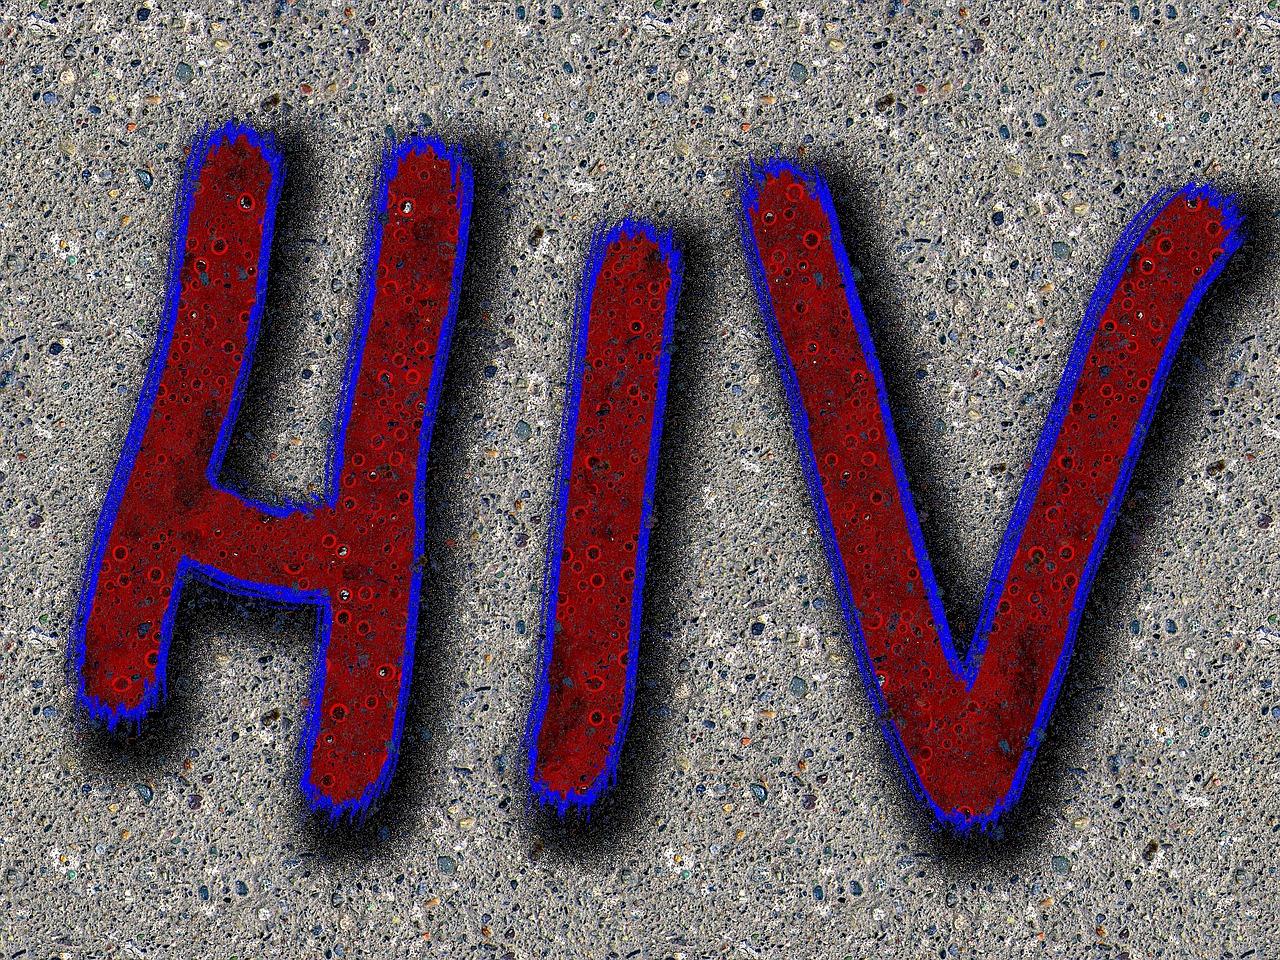 Fifty South Africans with HIV sterilized by force